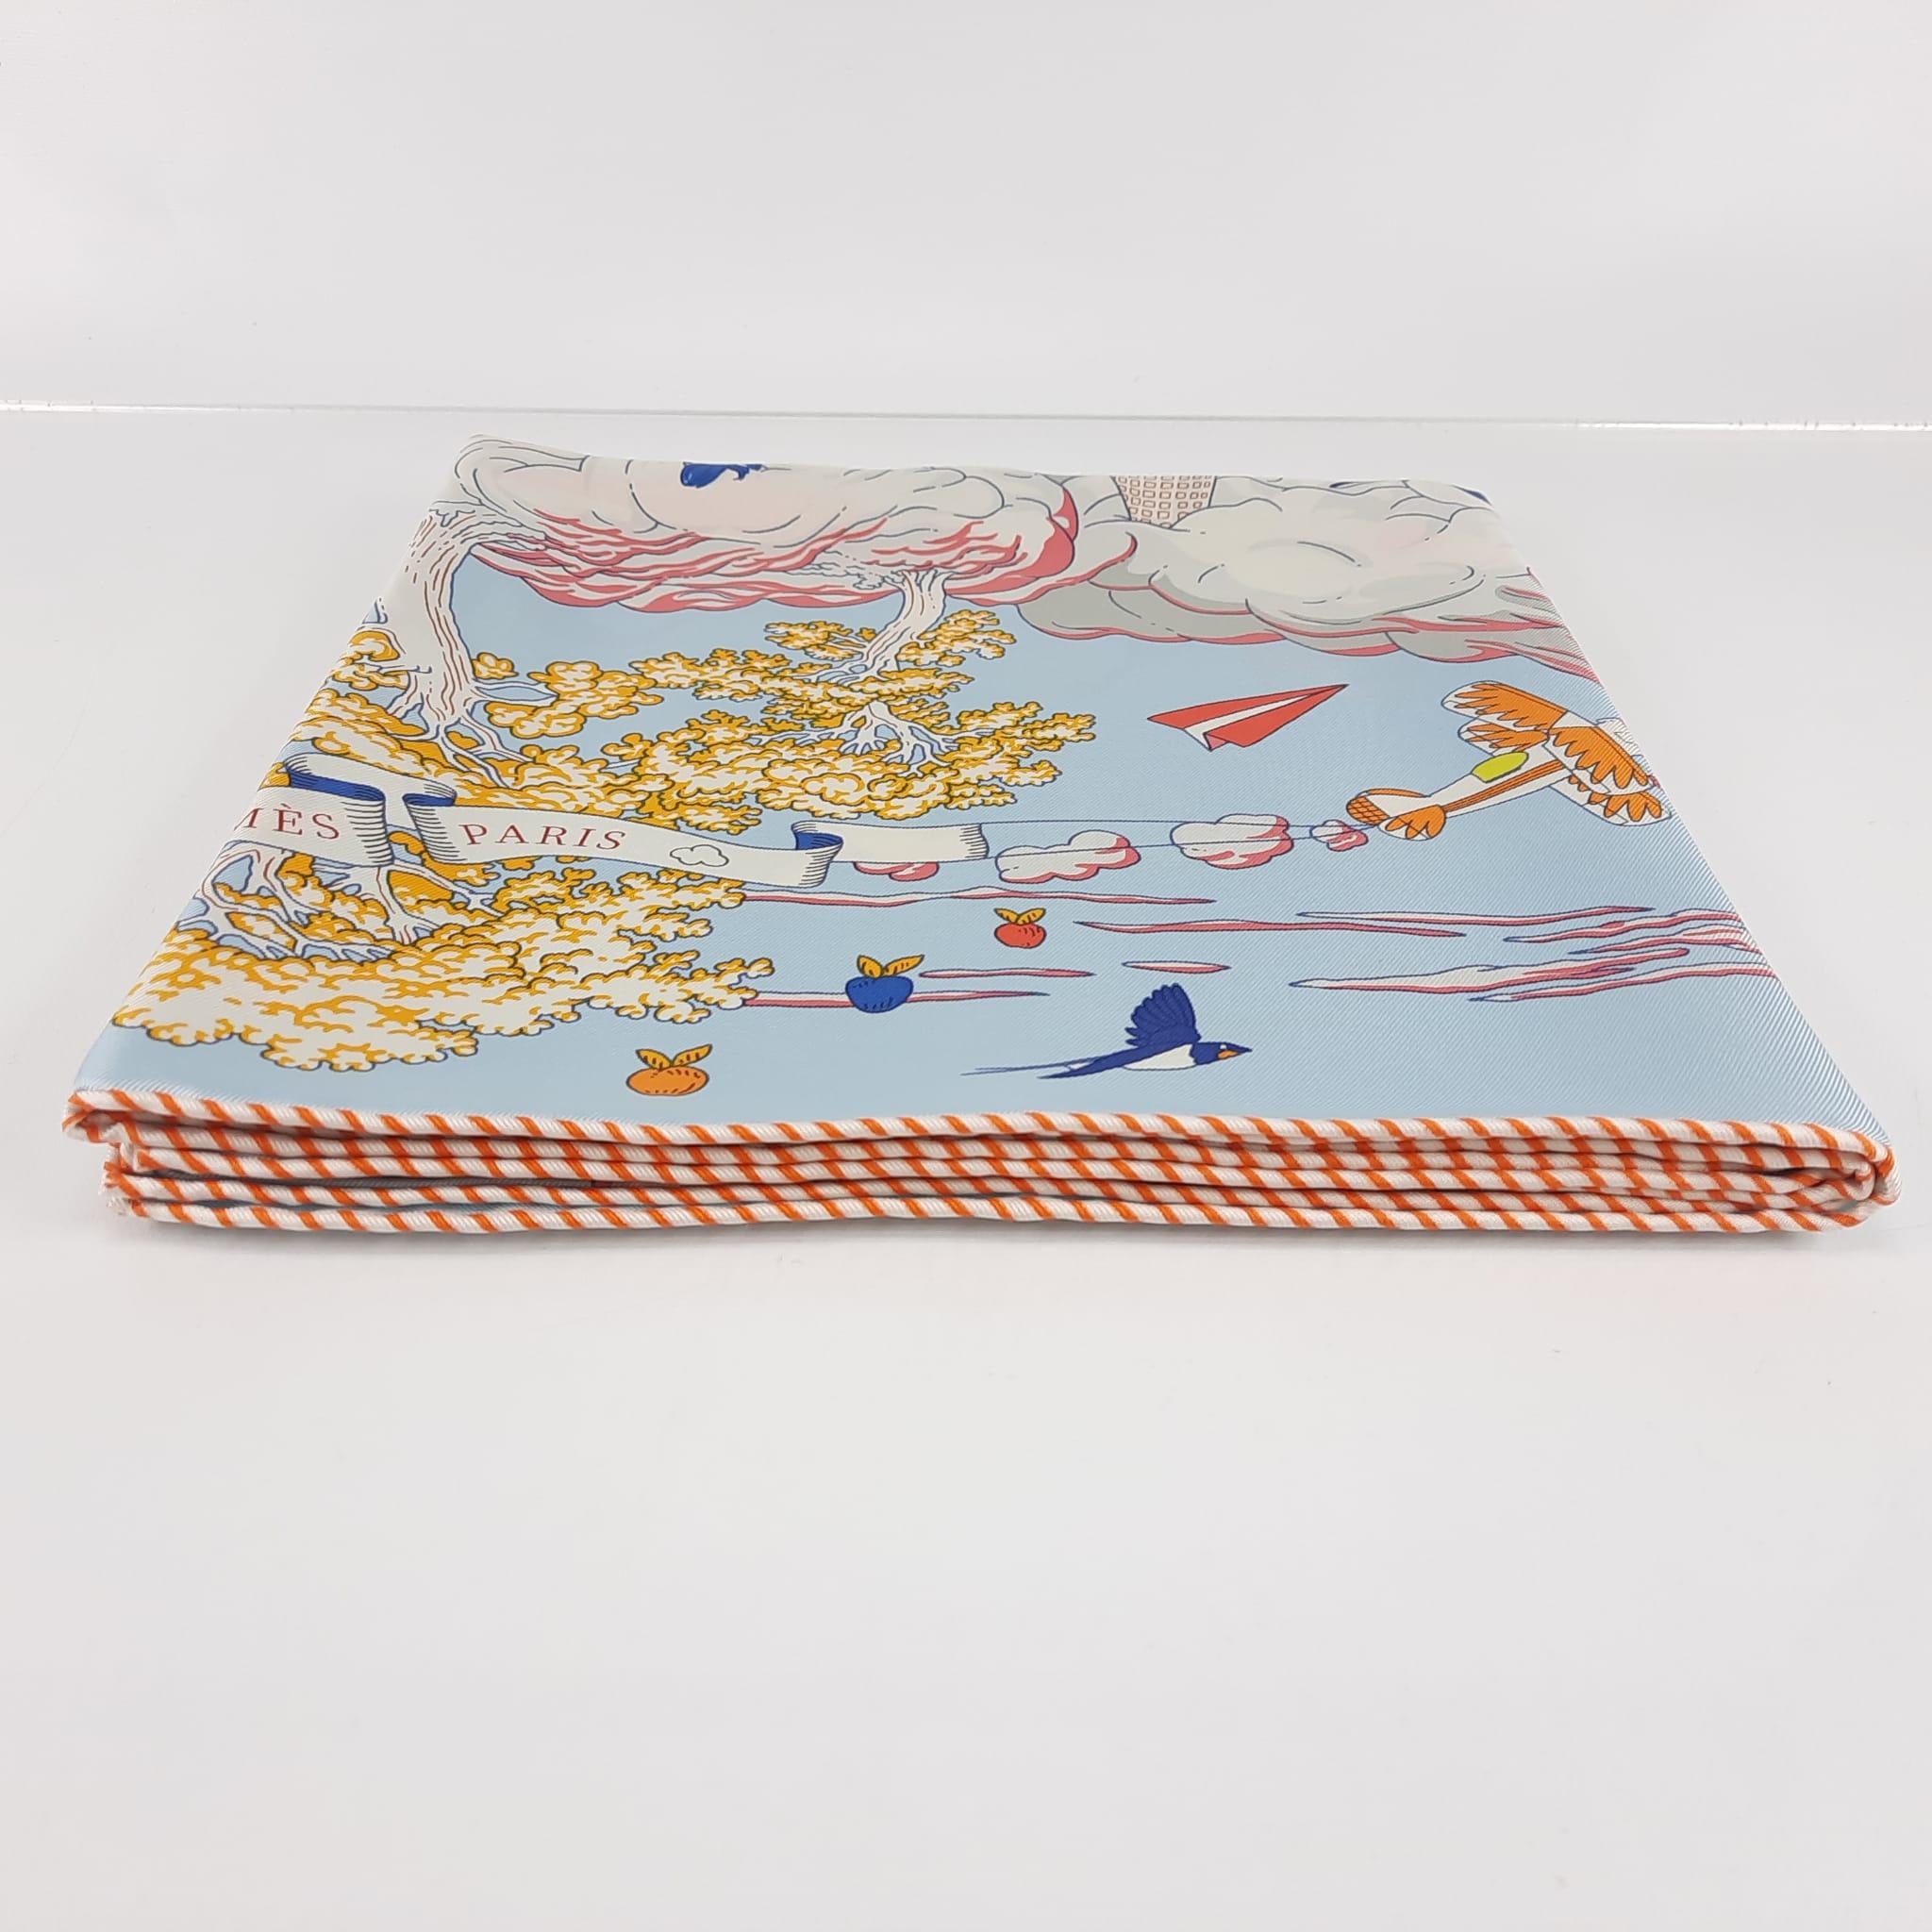 Scarf in silk twill with hand-rolled edges
The Hermès scarf is an infinite source of creativity and storytelling that constantly evolves thanks to the new designs and color combinations offered each season.
Designed by Dimitri Rybaltchenko